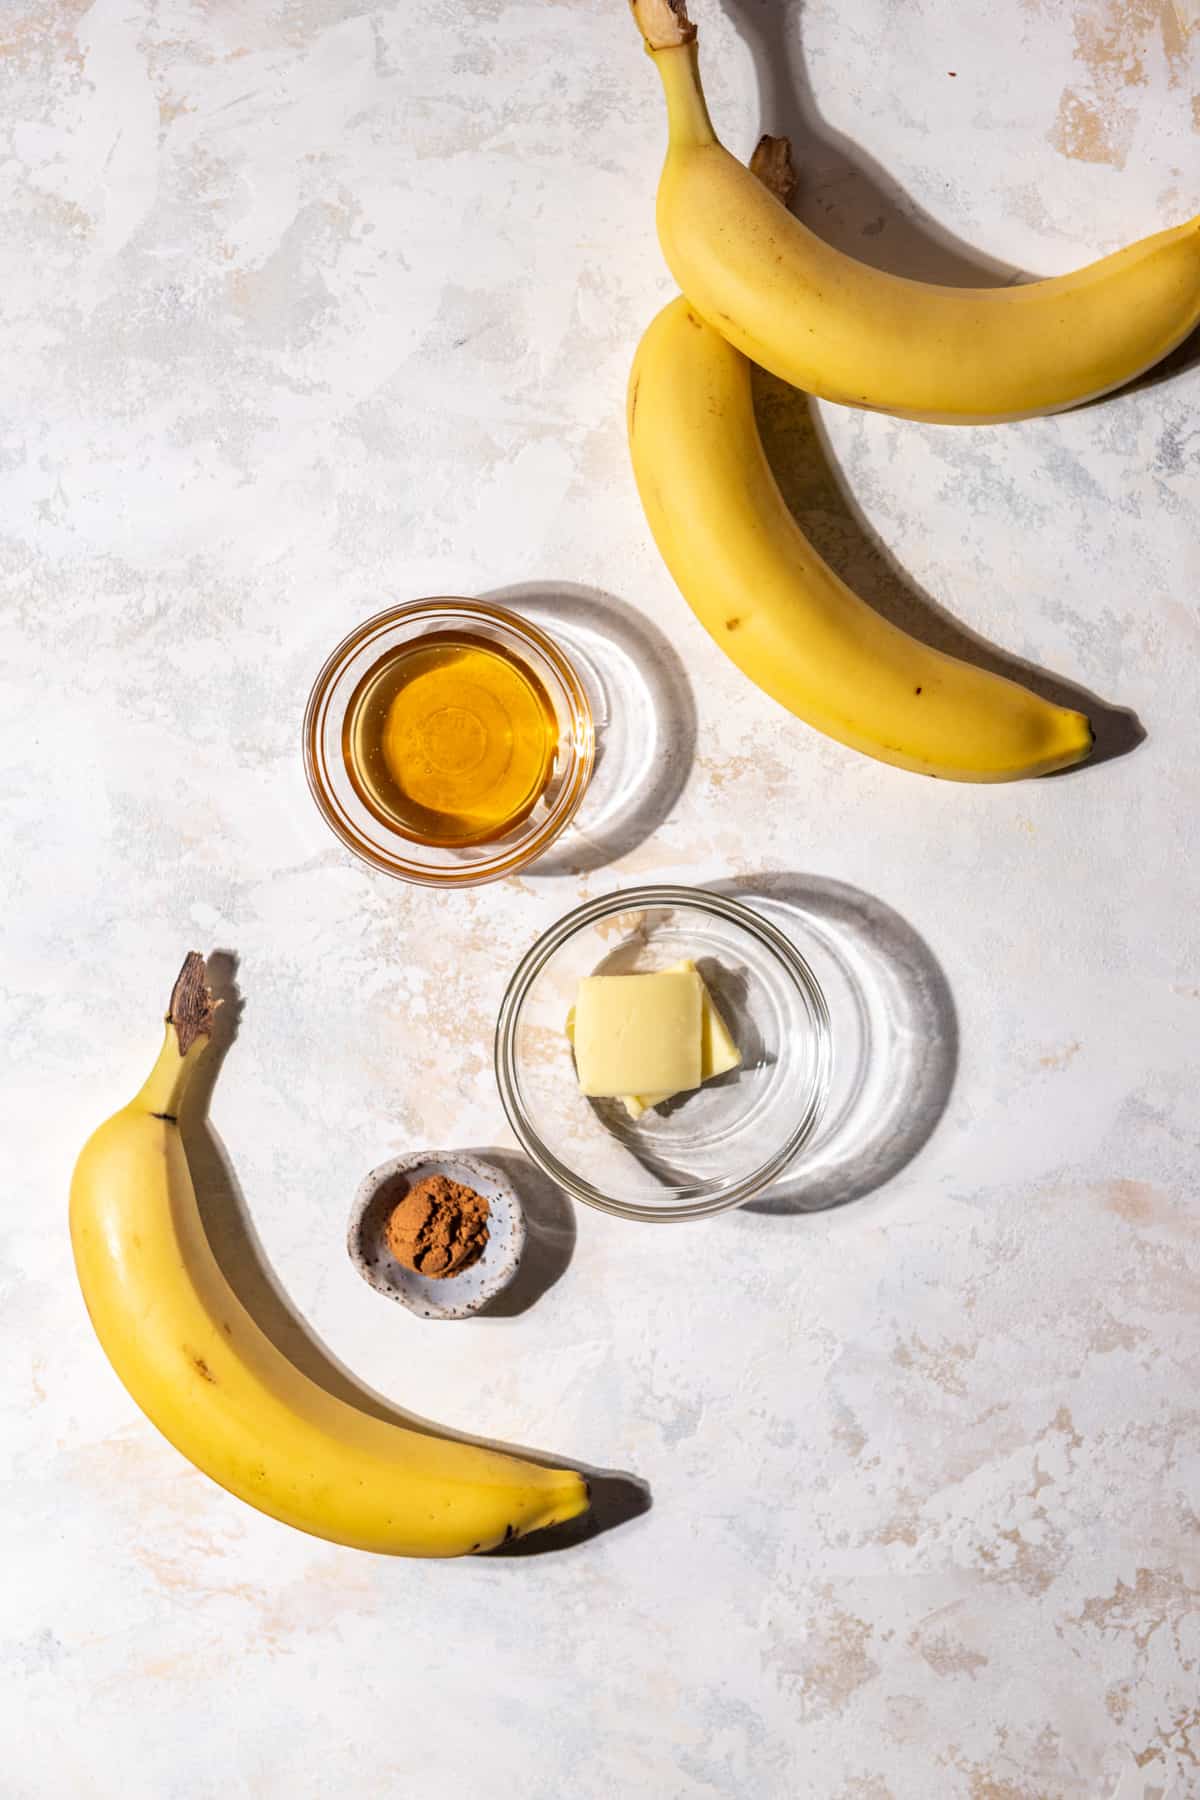 Ingredients to make honey caramelized bananas on a surface.